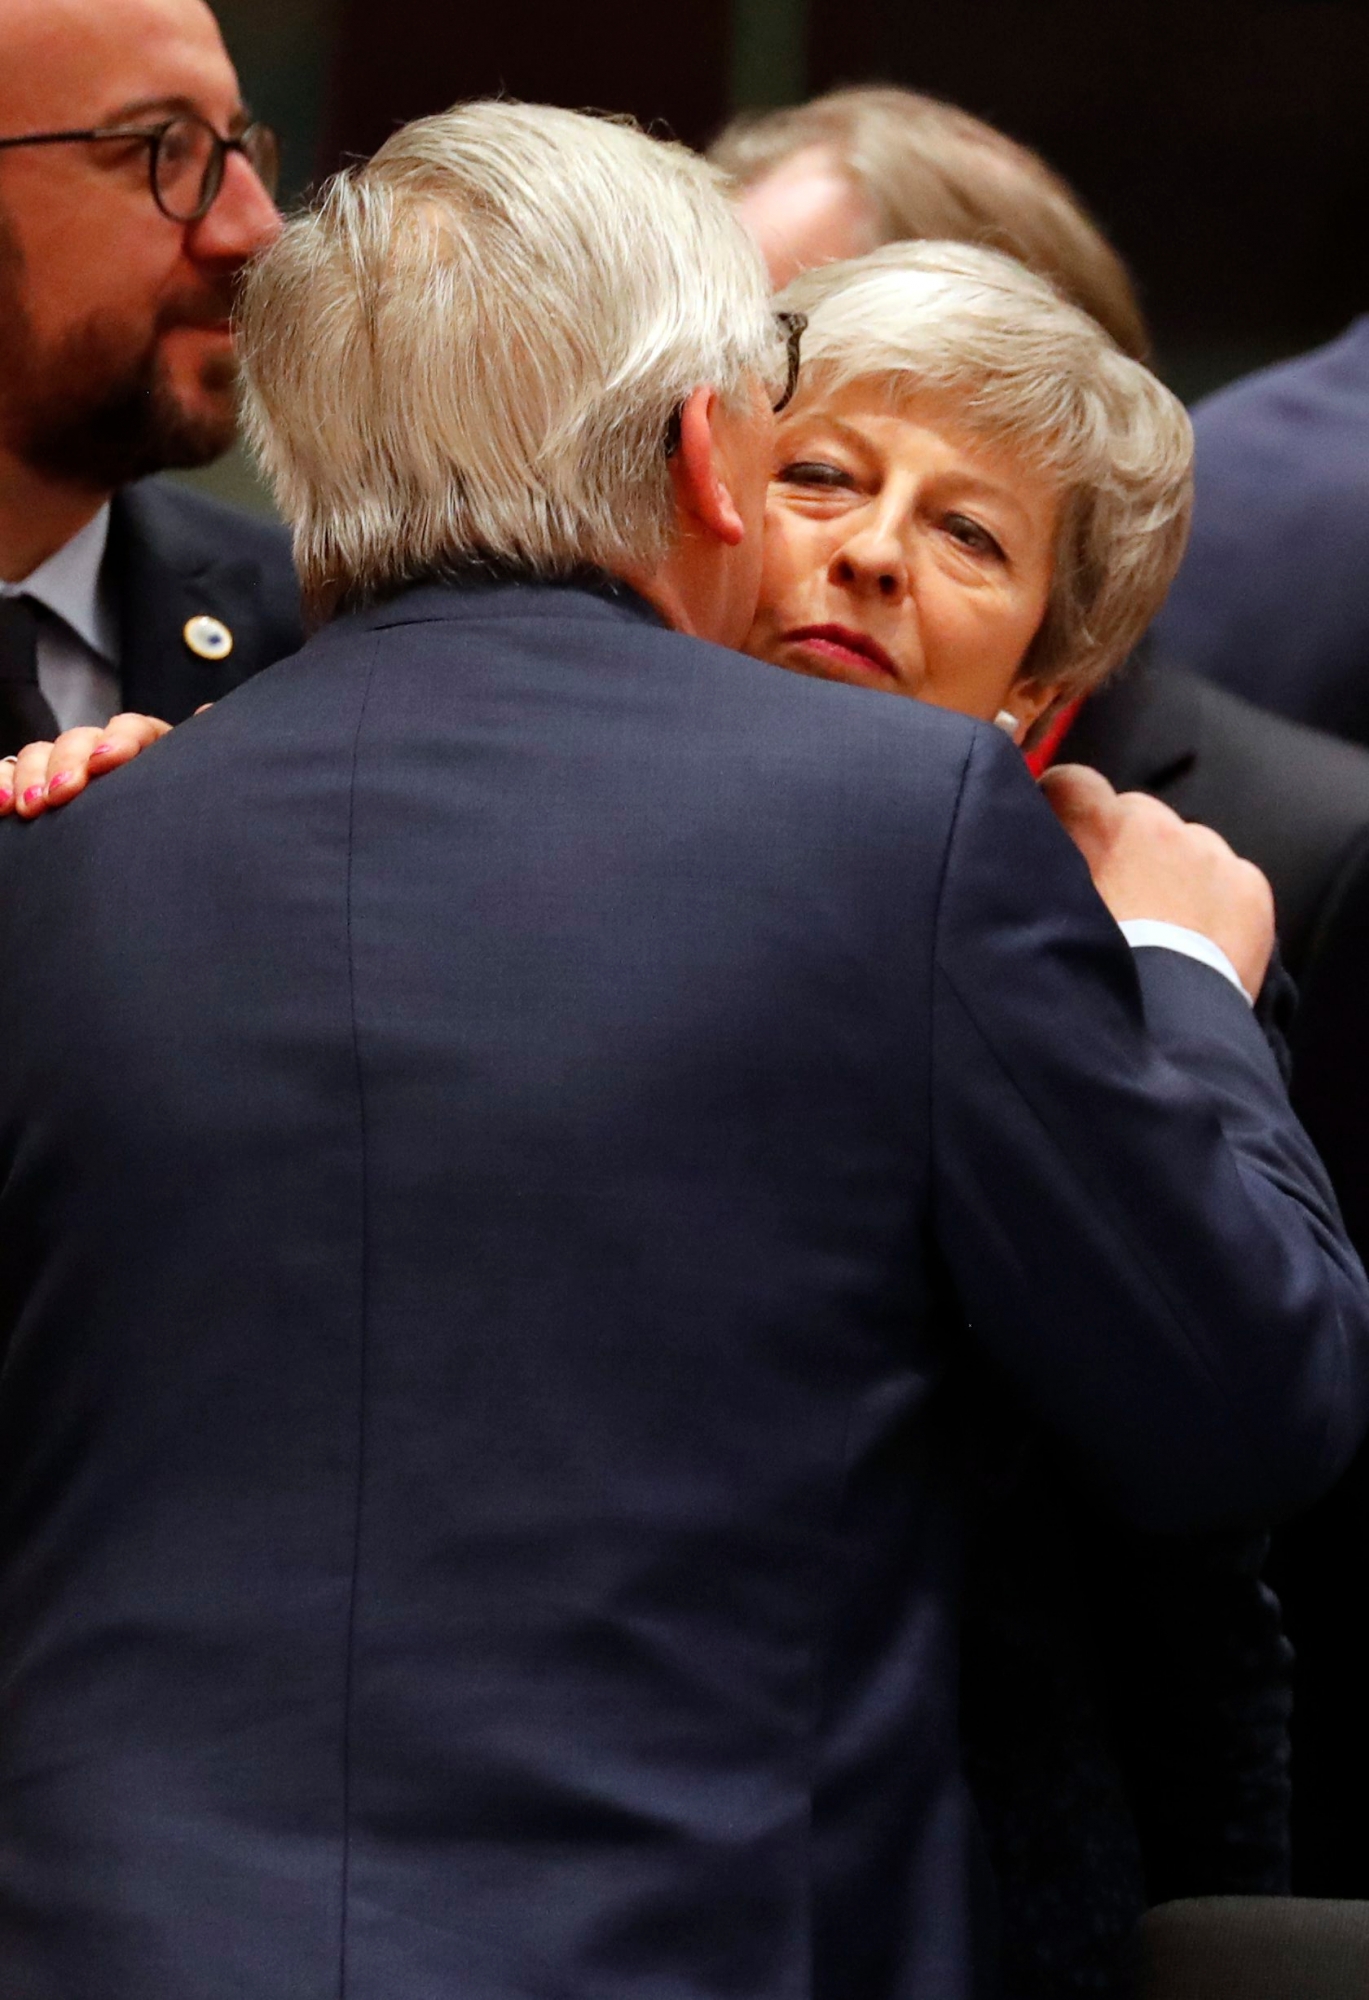 British Prime Minister Theresa May, right, is greeted by European Commission President Jean-Claude Juncker during a round table meeting at an EU summit in Brussels, Thursday, March 21, 2019. British Prime Minister Theresa May is trying to persuade European Union leaders to delay Brexit by up to three months, just eight days before Britain is scheduled to leave the bloc. (AP Photo/Frank Augstein) Belgium EU Brexit